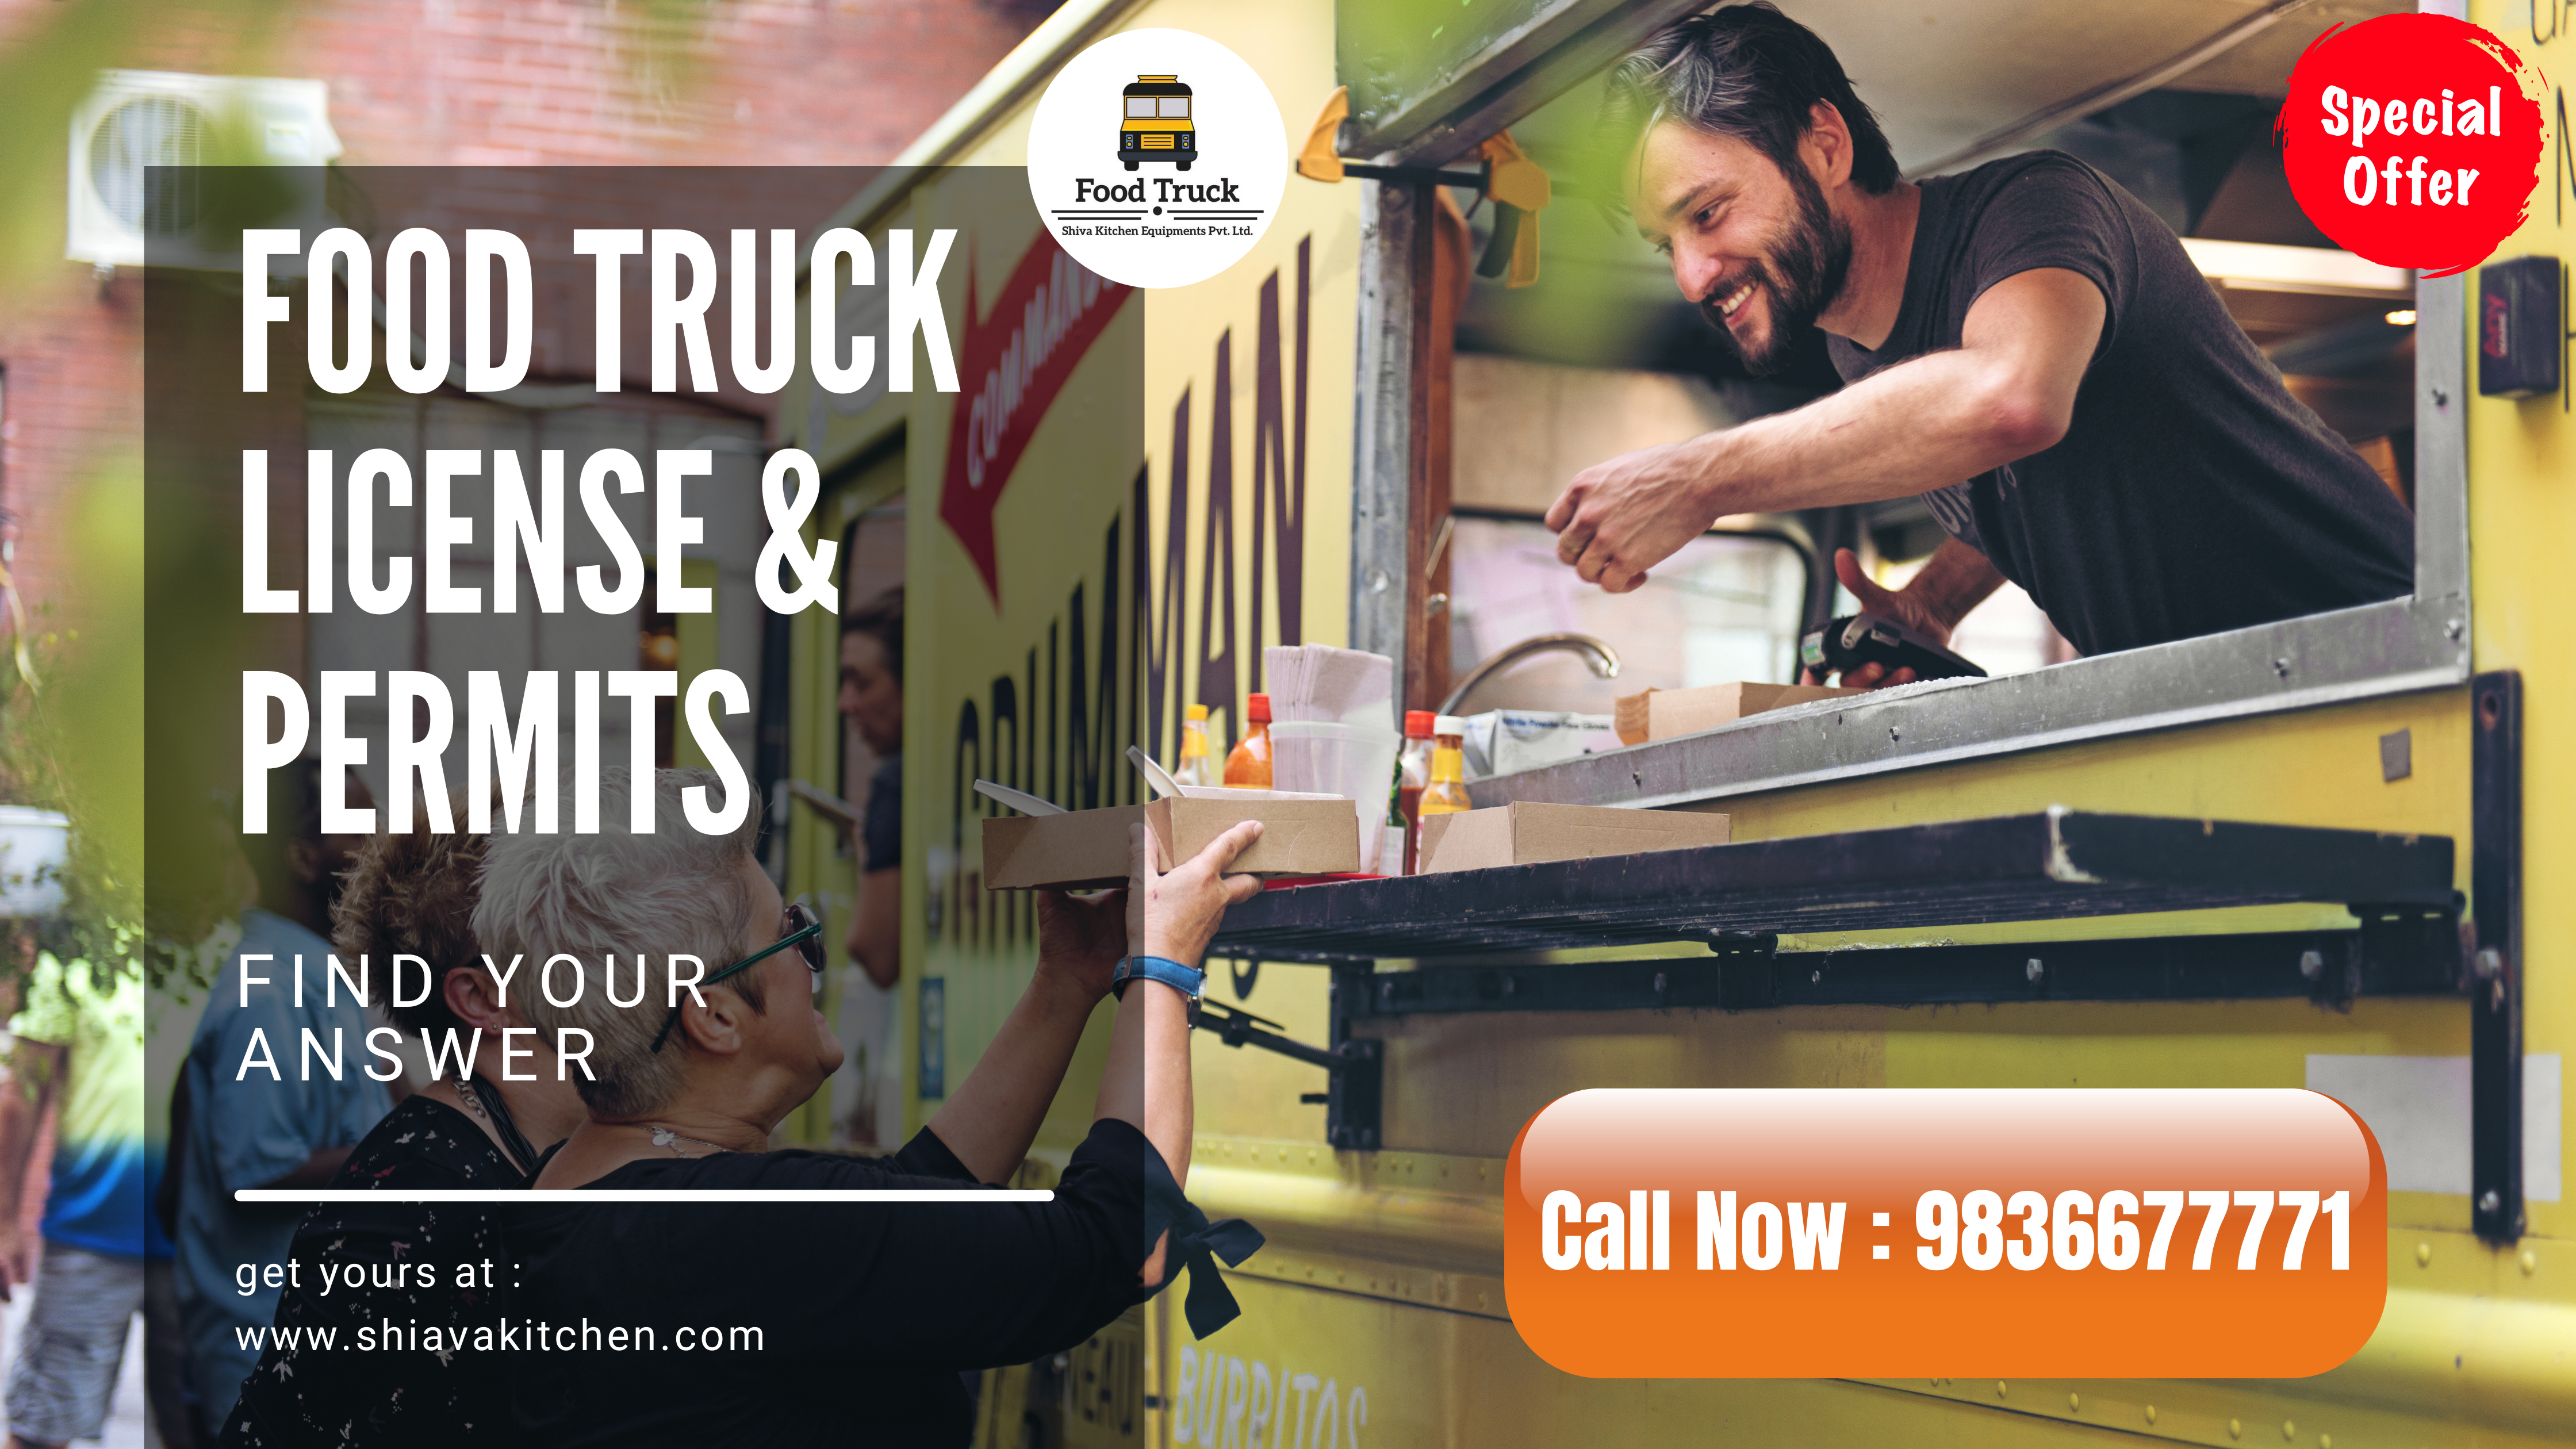 6 Amazing Facts About Step by Step Guide to Food Truck Permits & License